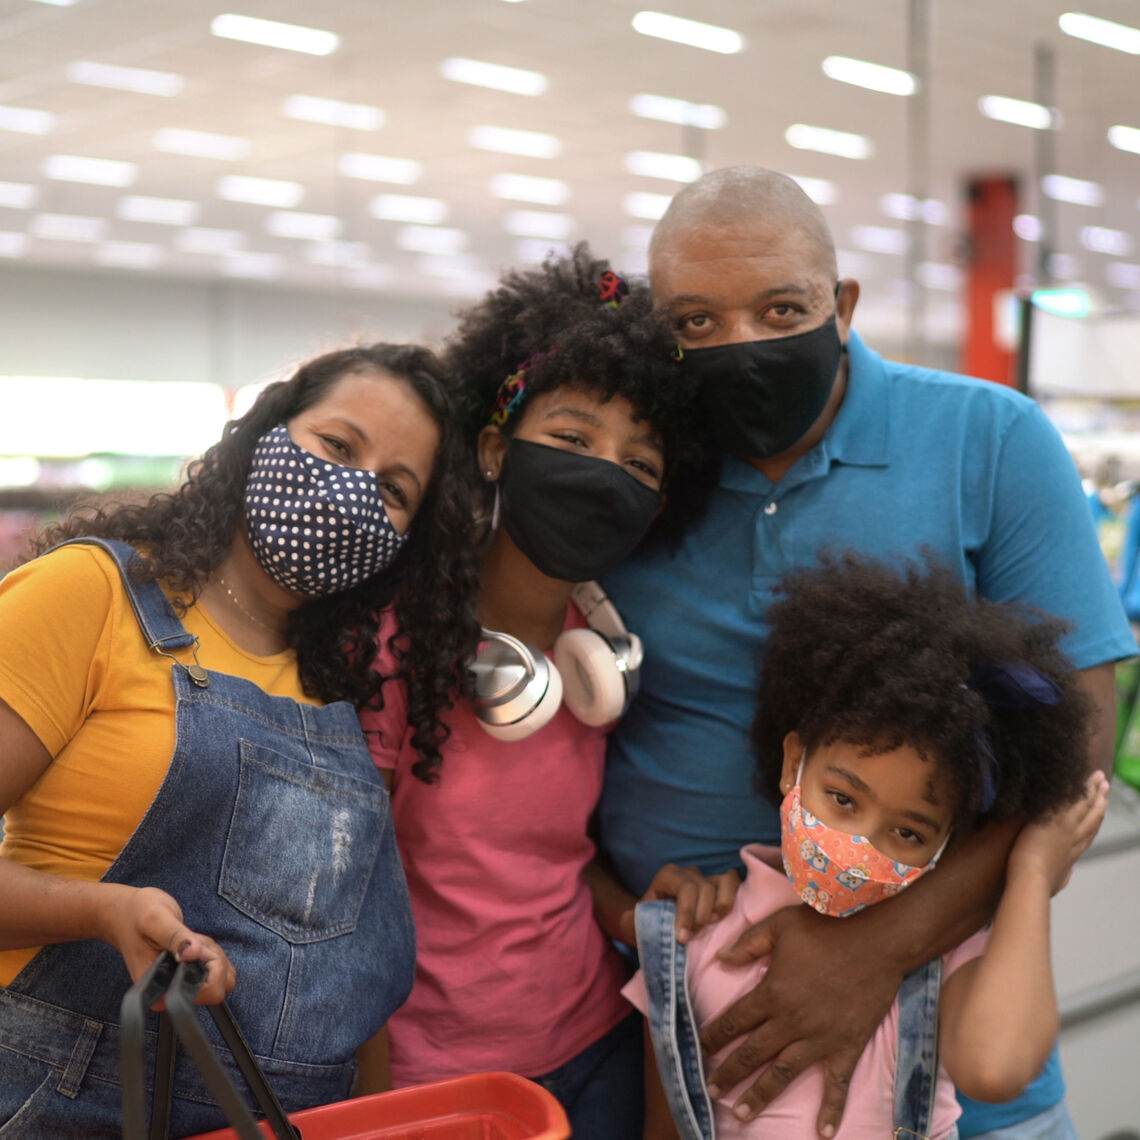 Family with two kids posing for a photo in the grocery store, with masks on